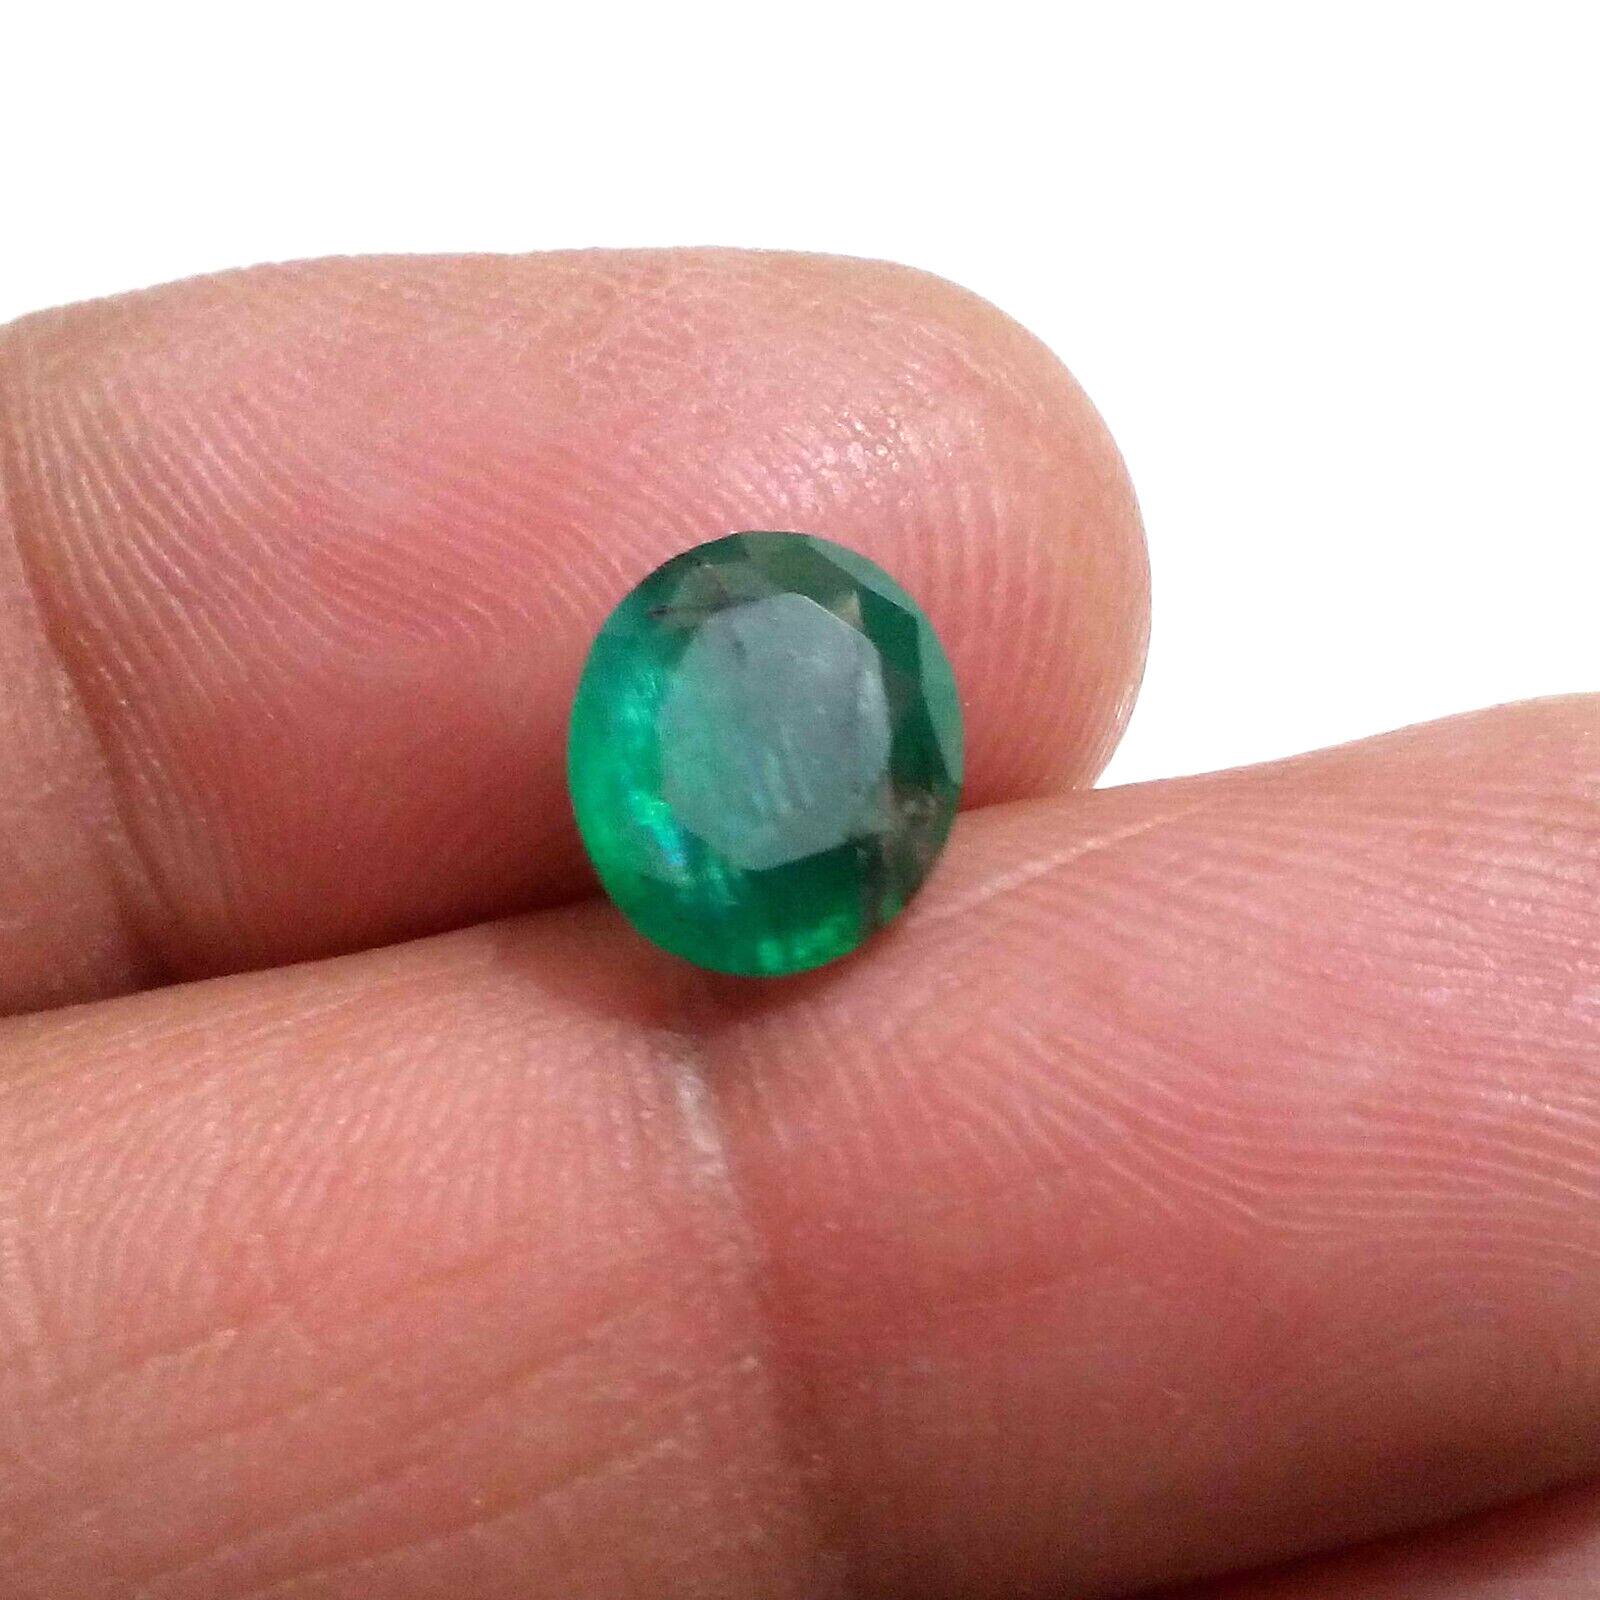 Gorgeous Zambian Emerald Oval Shape 2.50 Crt Rare Green Faceted Loose Gemstone